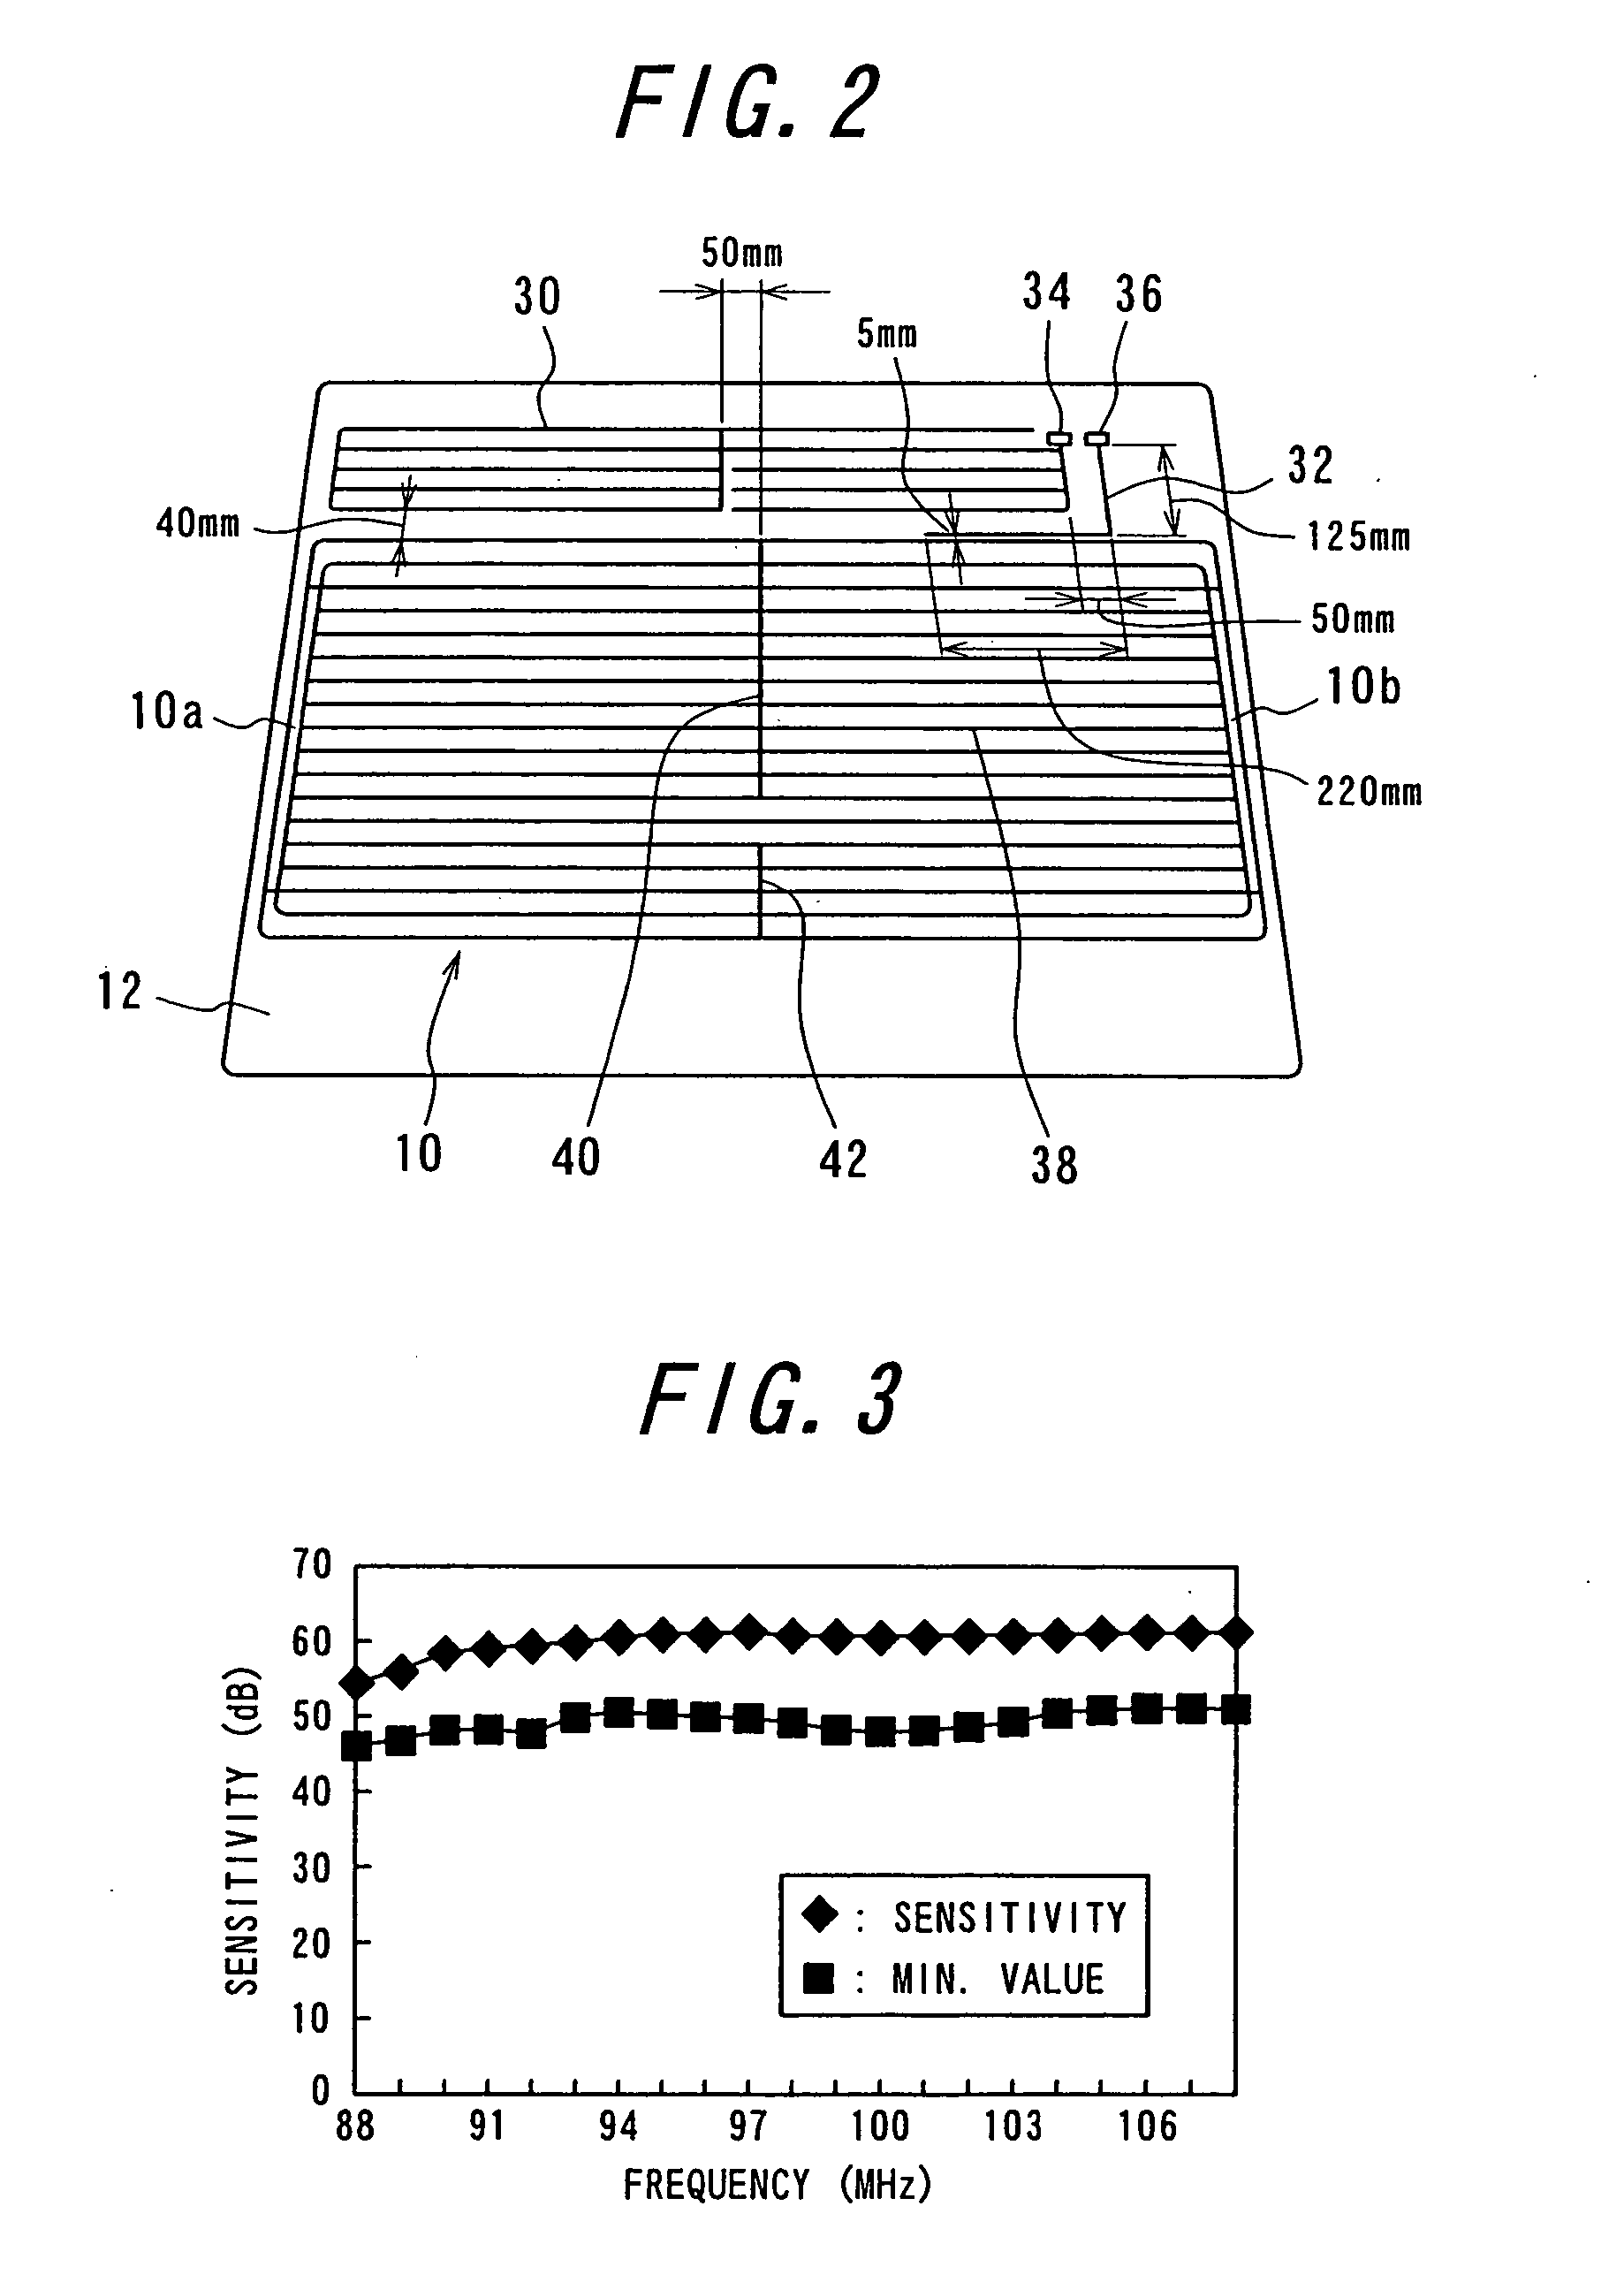 Heating line pattern structure of defogger